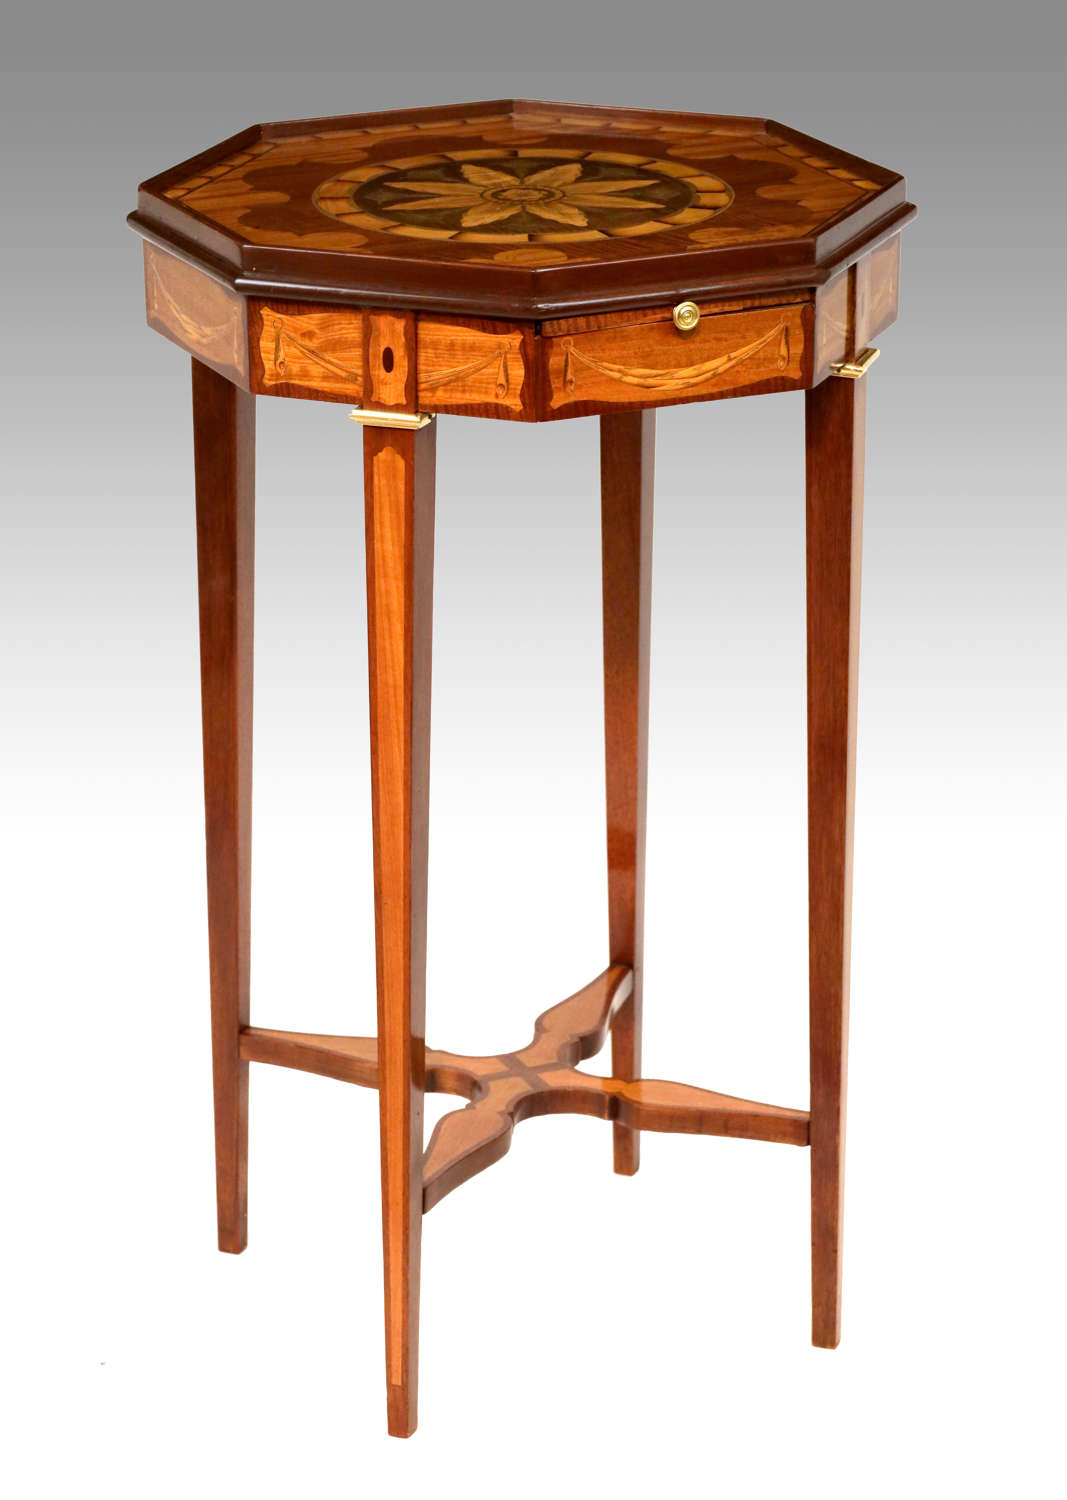 A Fine Quality Ormolu and Inlaid Mahogany Victorian Kettle stand